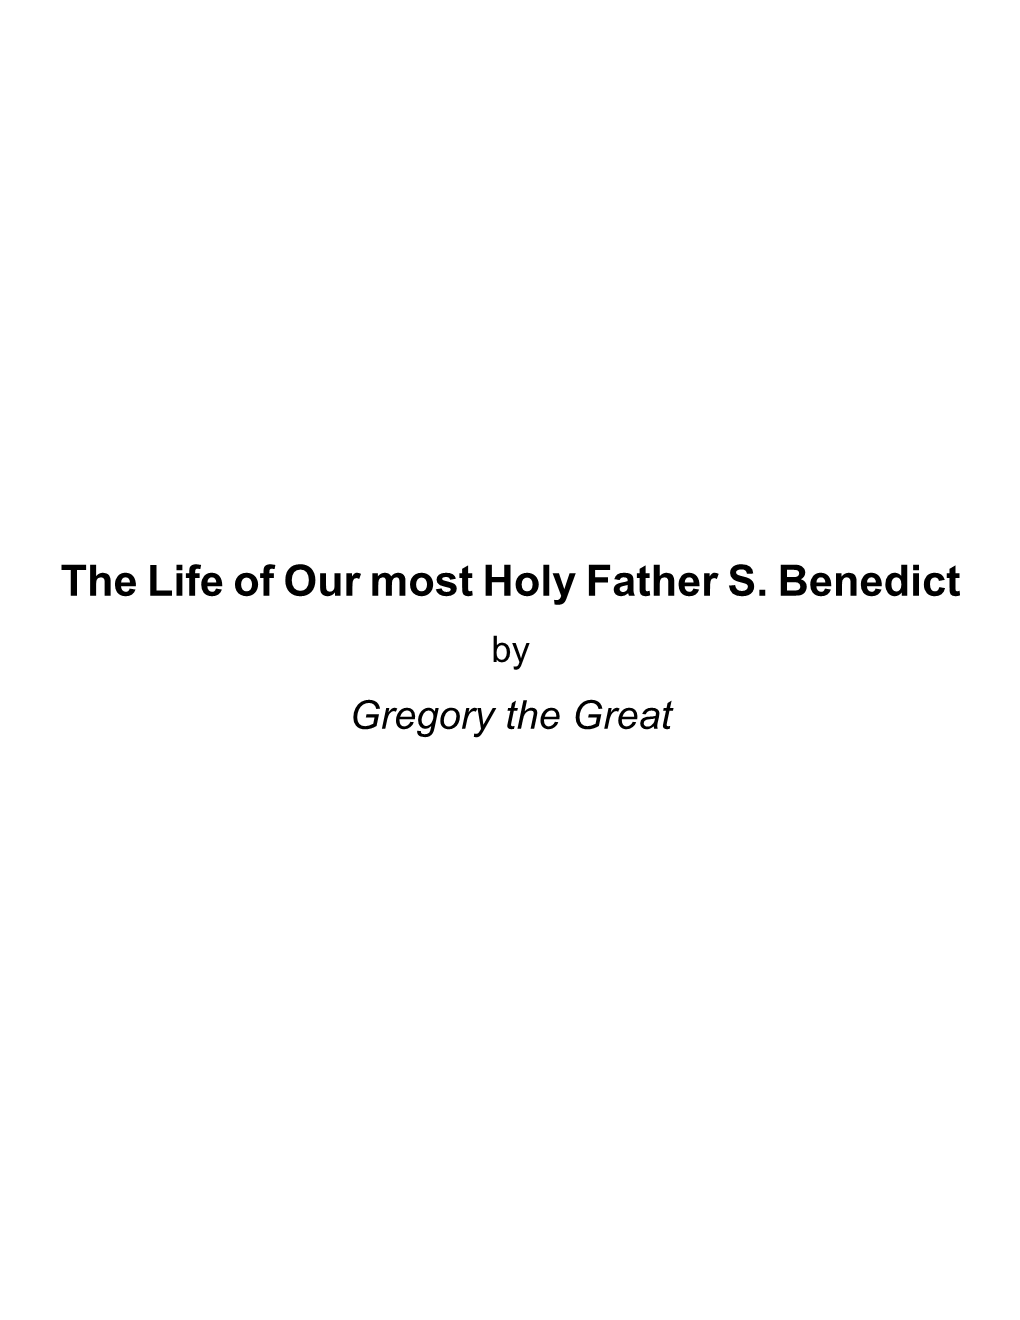 The Life of Our Most Holy Father S. Benedict by Gregory the Great About the Life of Our Most Holy Father S